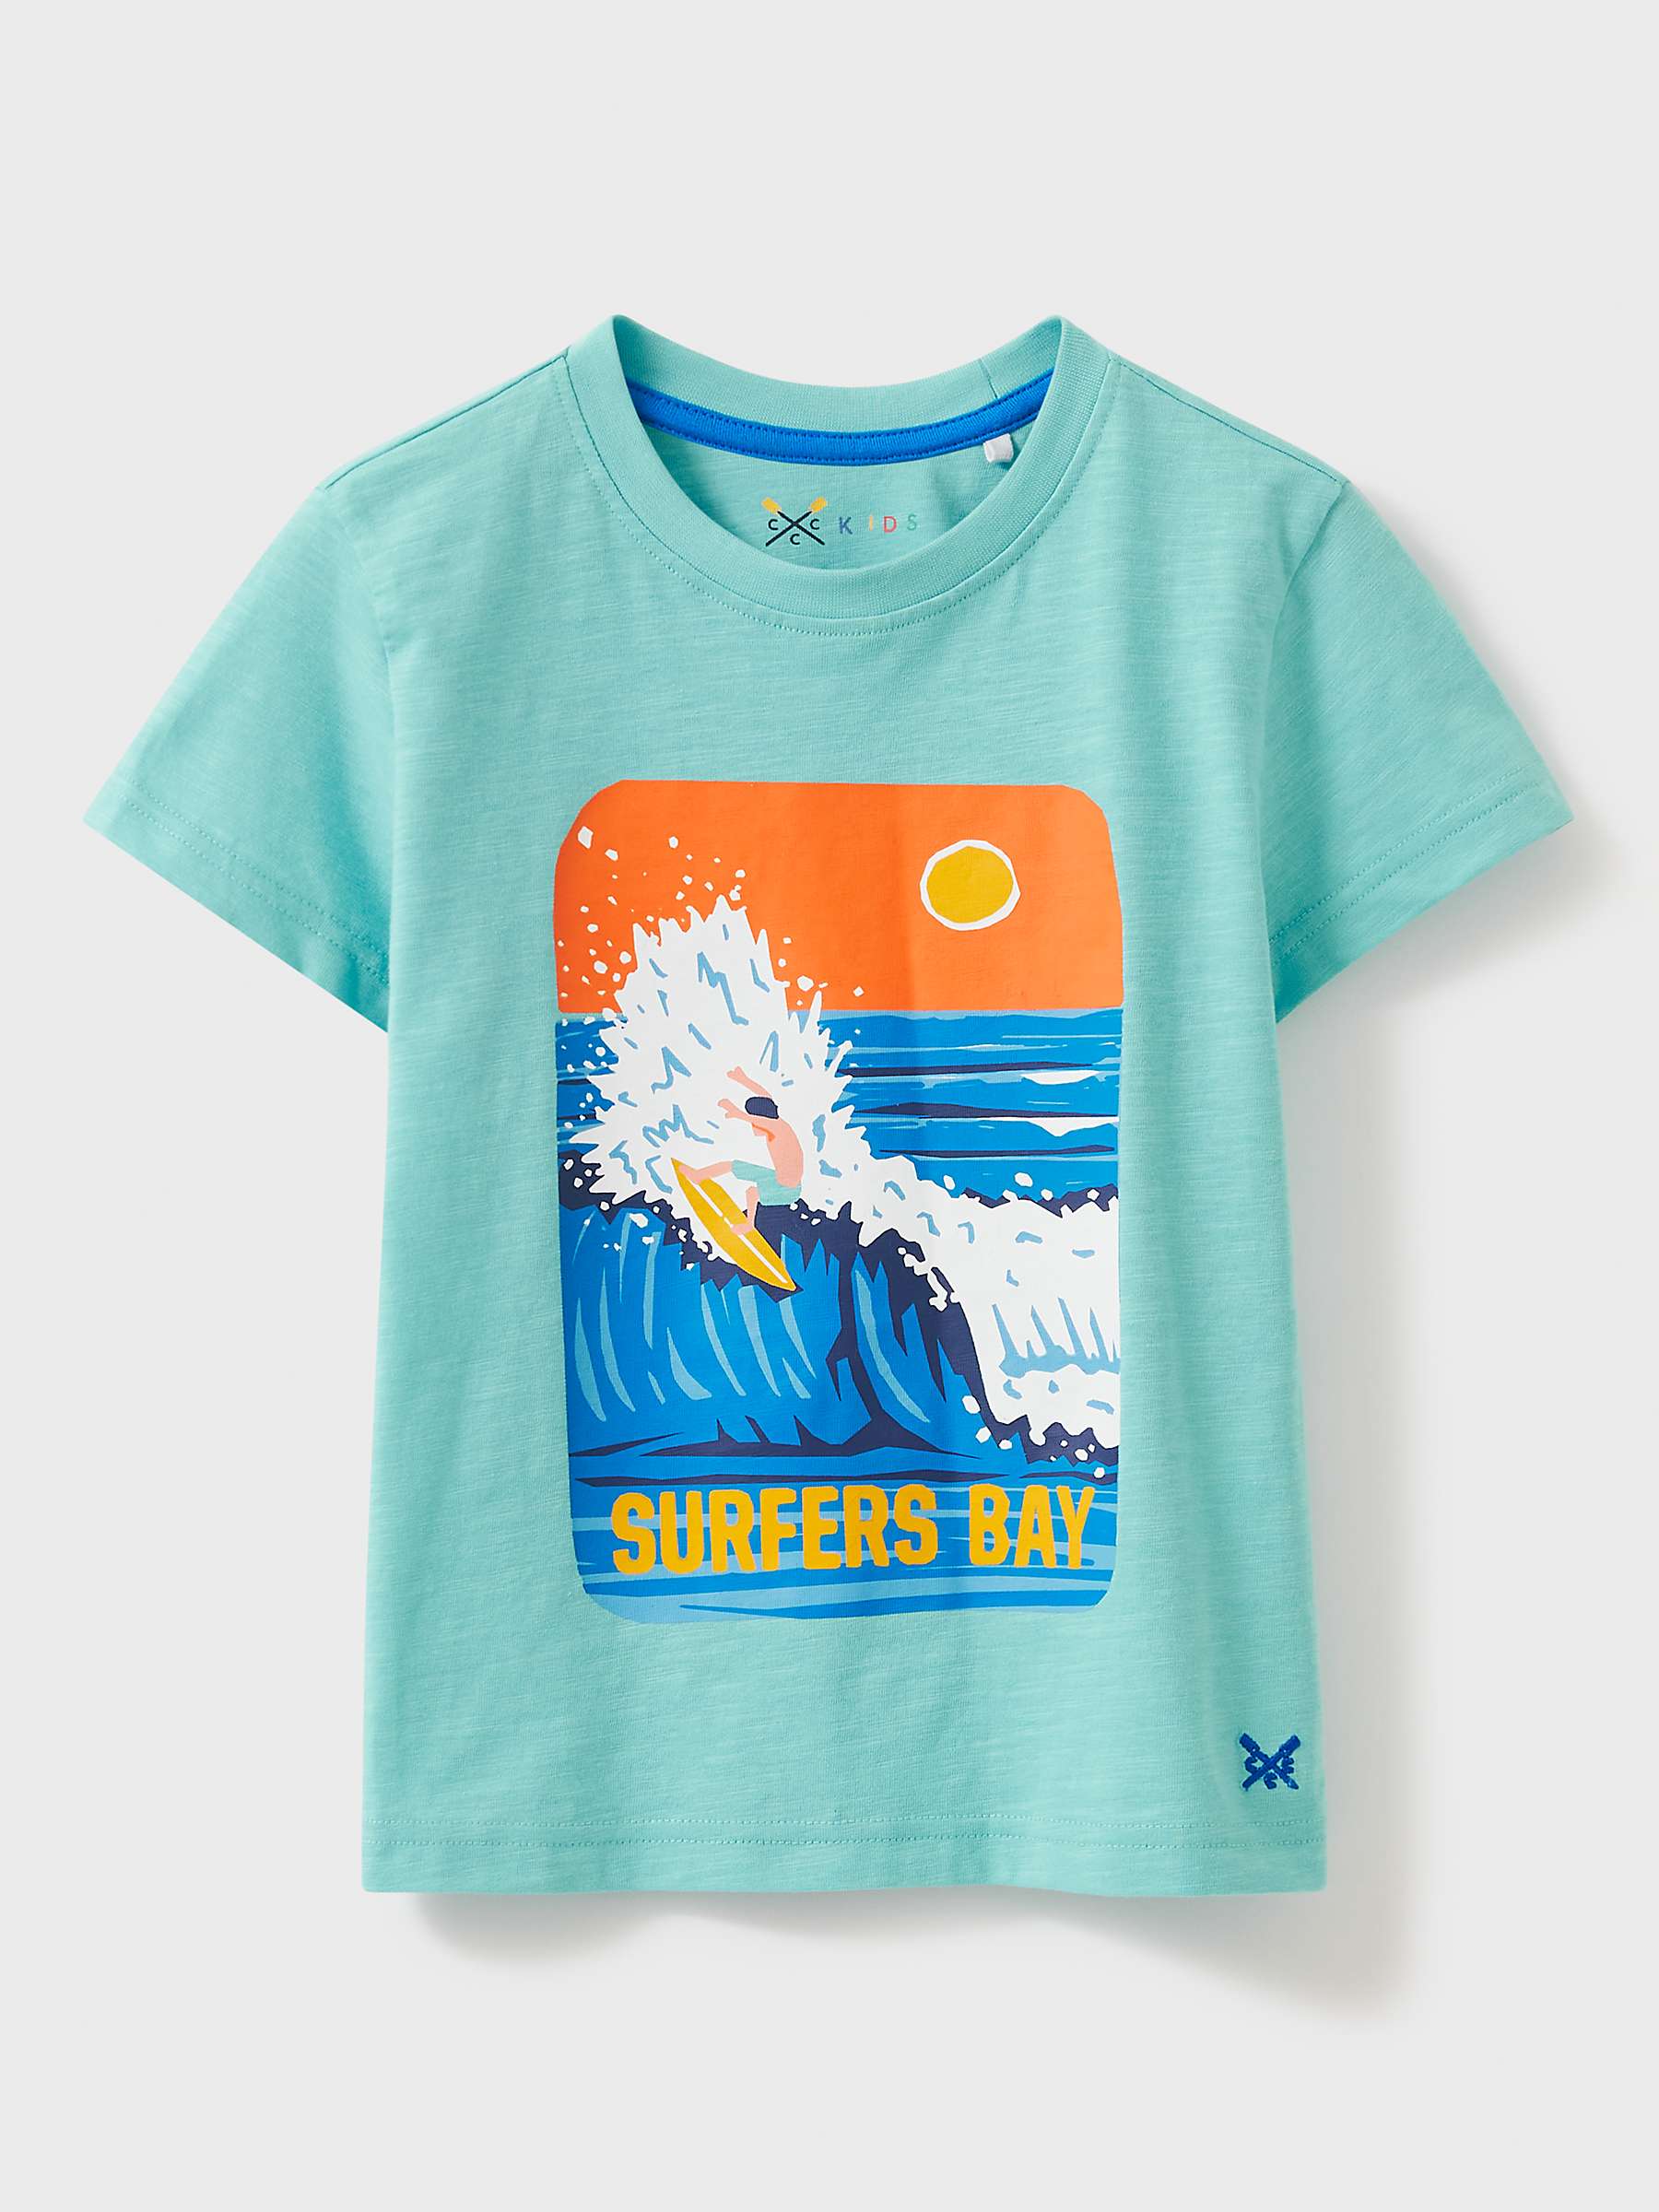 Buy Crew Clothing Kids' Surfer's Bay T-Shirt, Turquoise Online at johnlewis.com